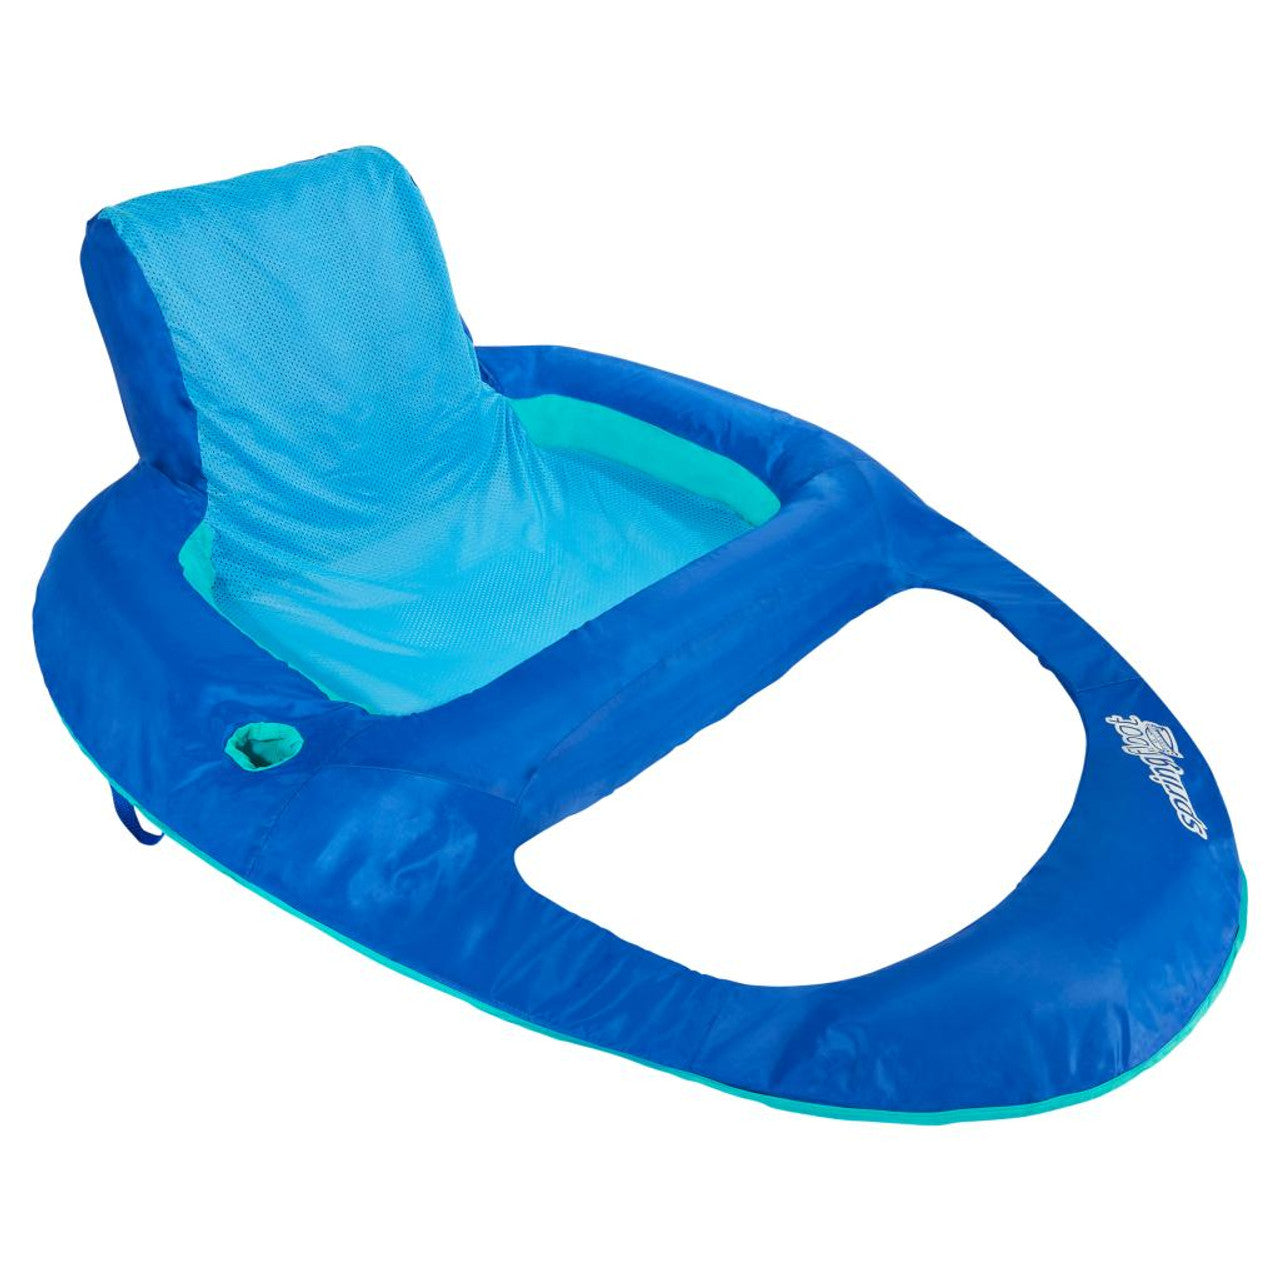 Spring Float Recliner XL Inflatable Pool Lounger with Hyper-Flate Valve